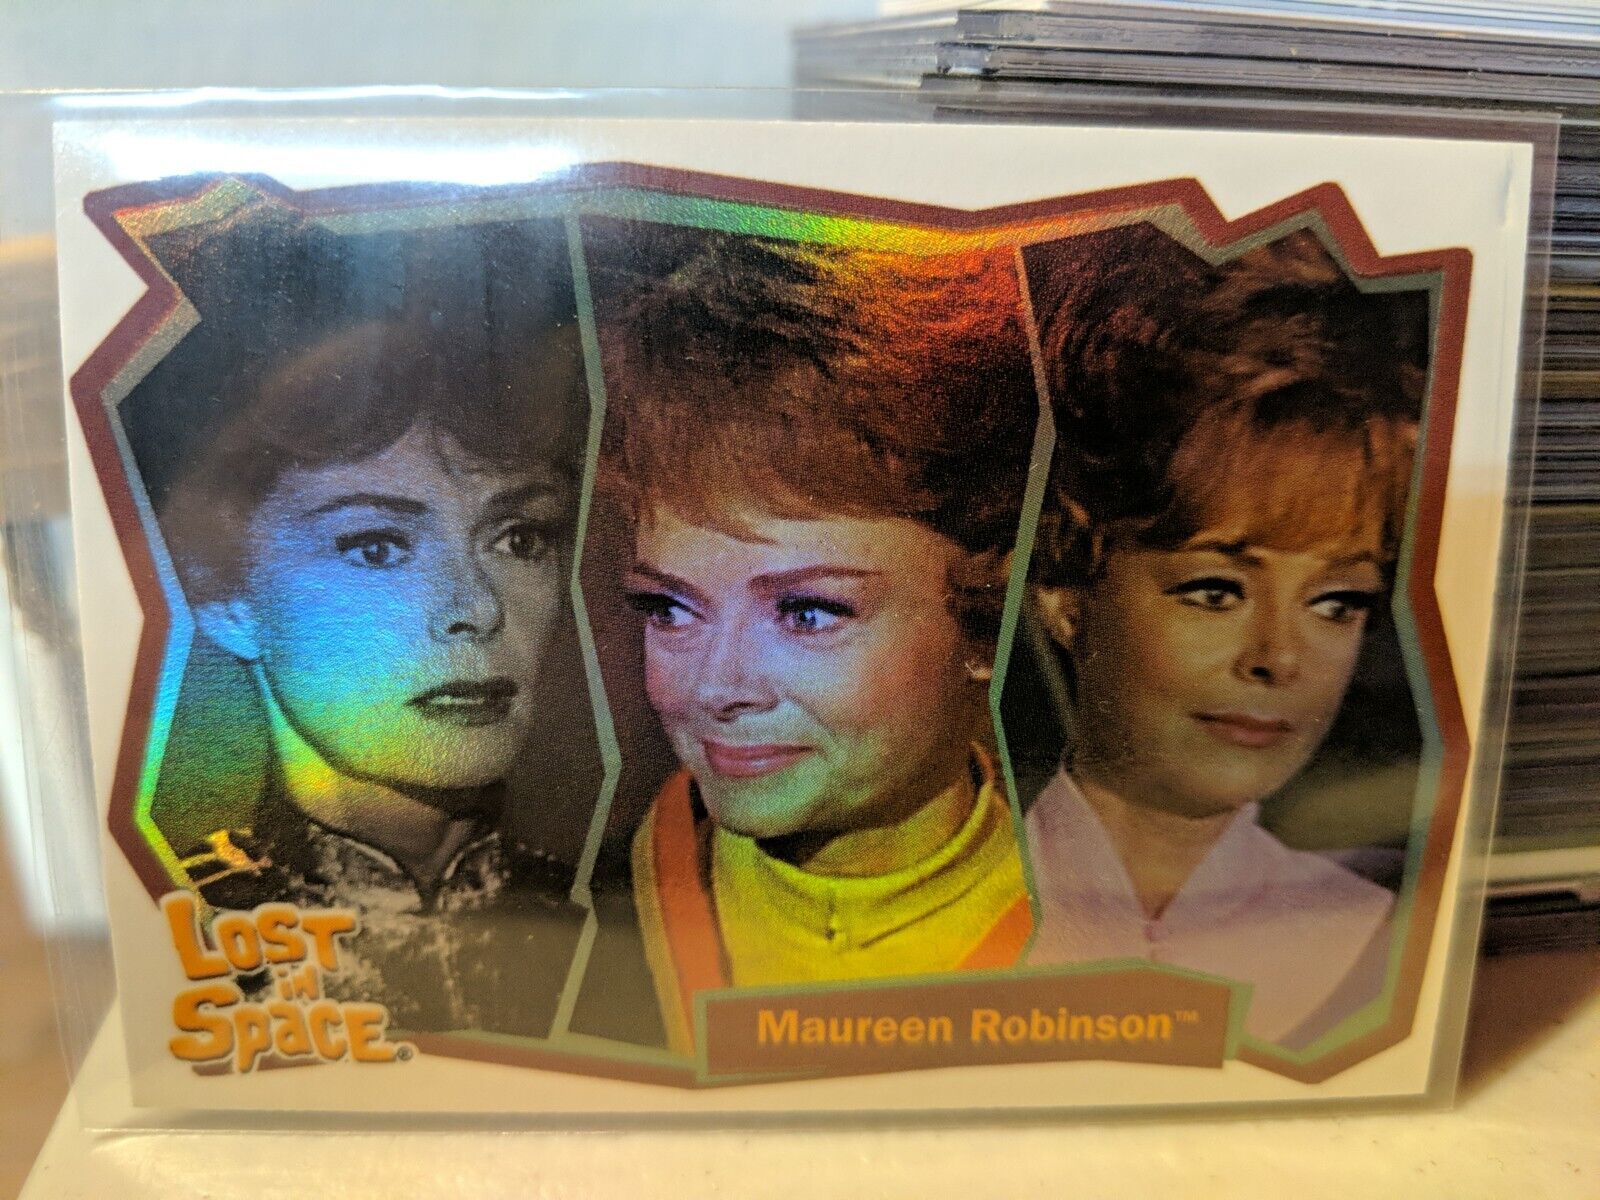 Complete Lost In Space Character Insert #2 June Lockhart as Maureen Robinson